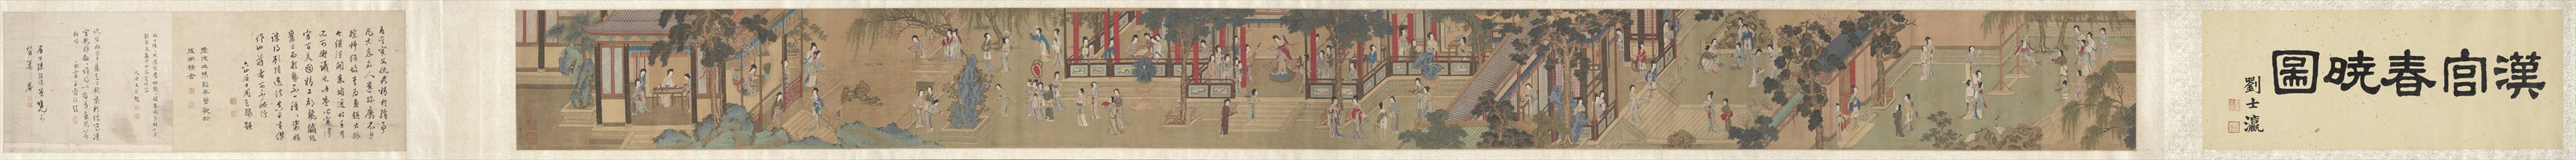 Palace Ladies, 1644-1911. Copy after Qiu Ying (Chinese, 1494-1552). Handscroll, ink and color on